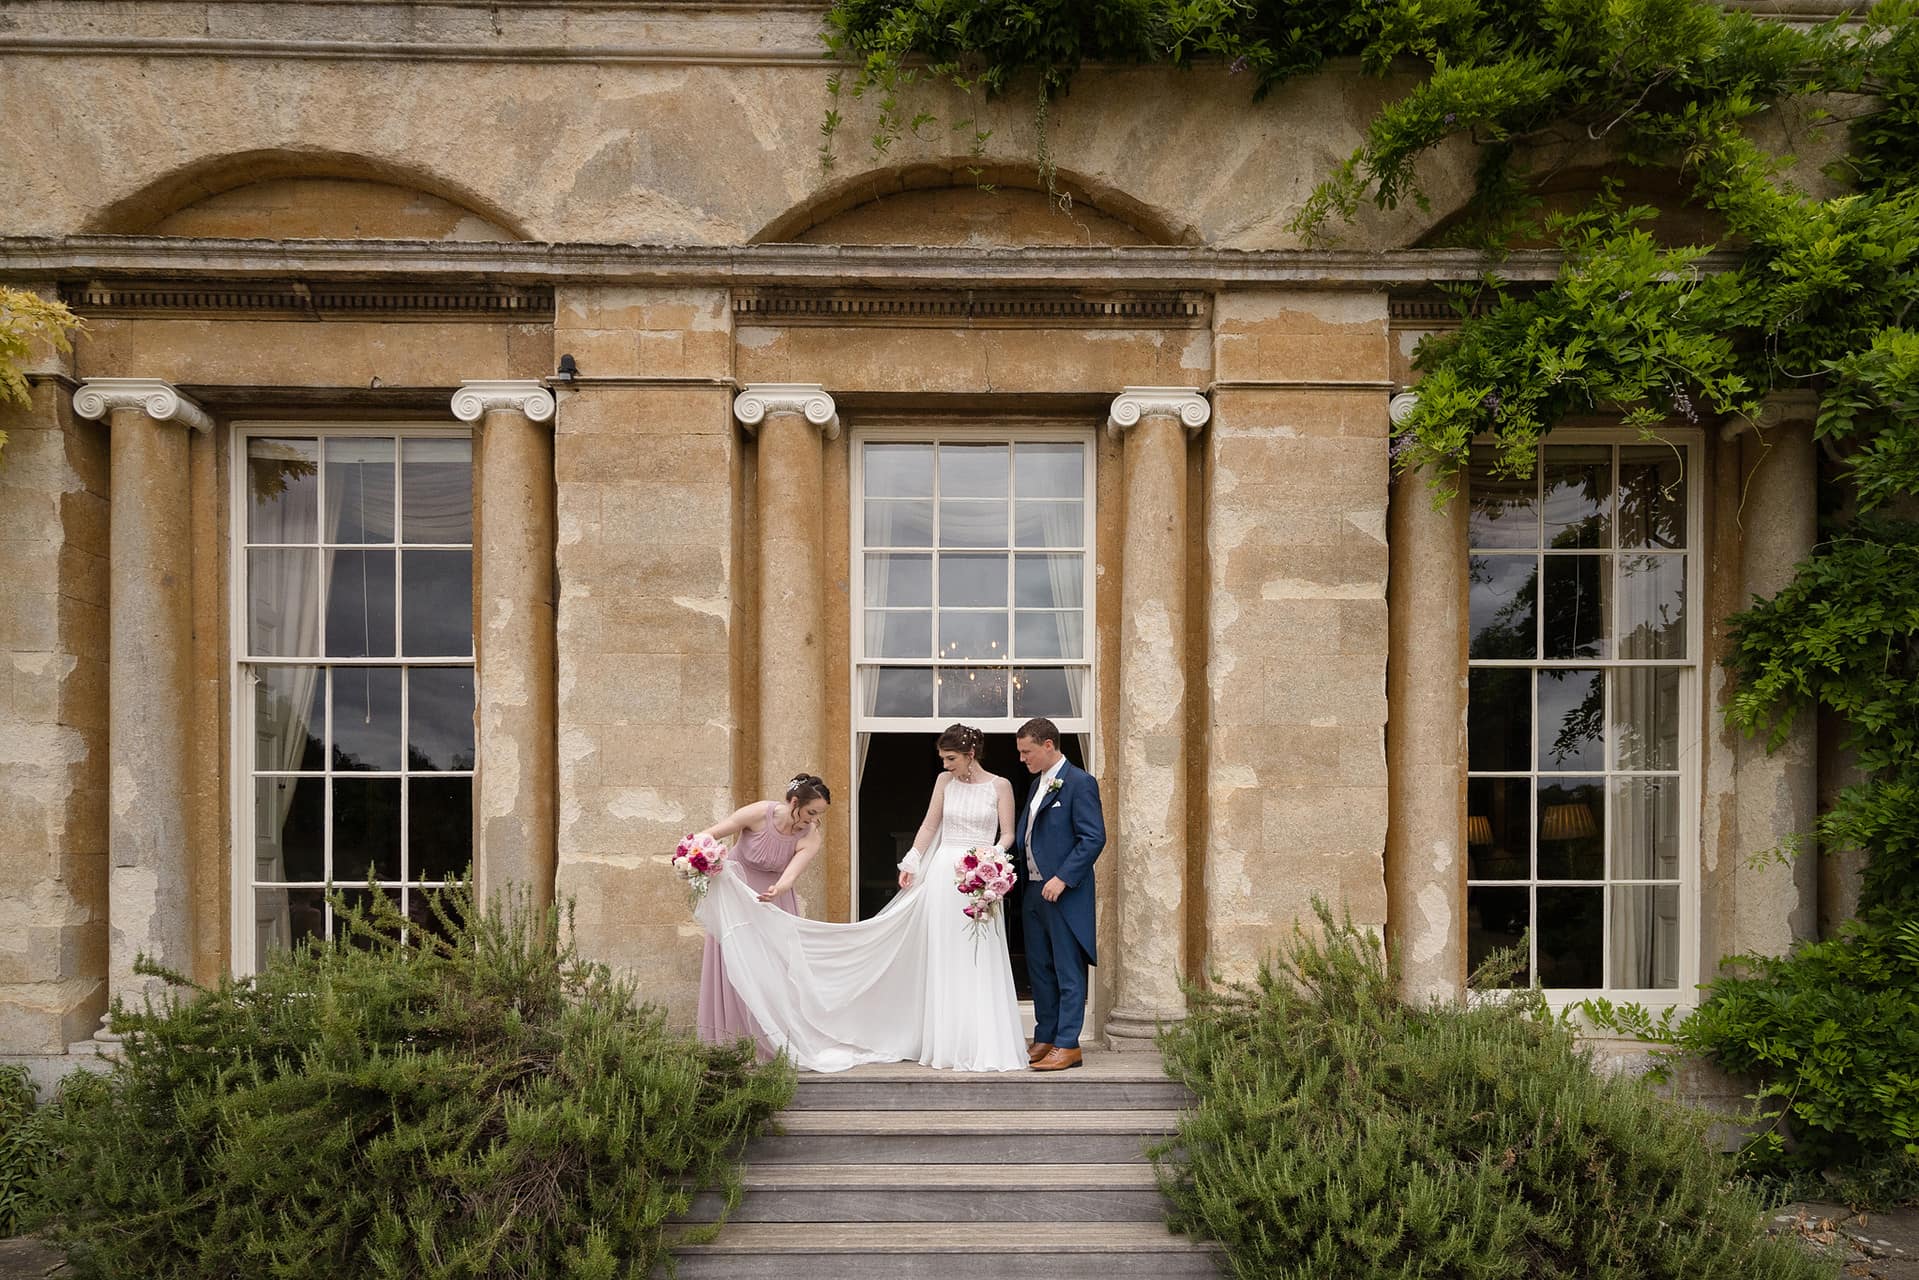 Bridesmaid arranging the bride's dress as she walks out of a sliding sash window door at a period country house